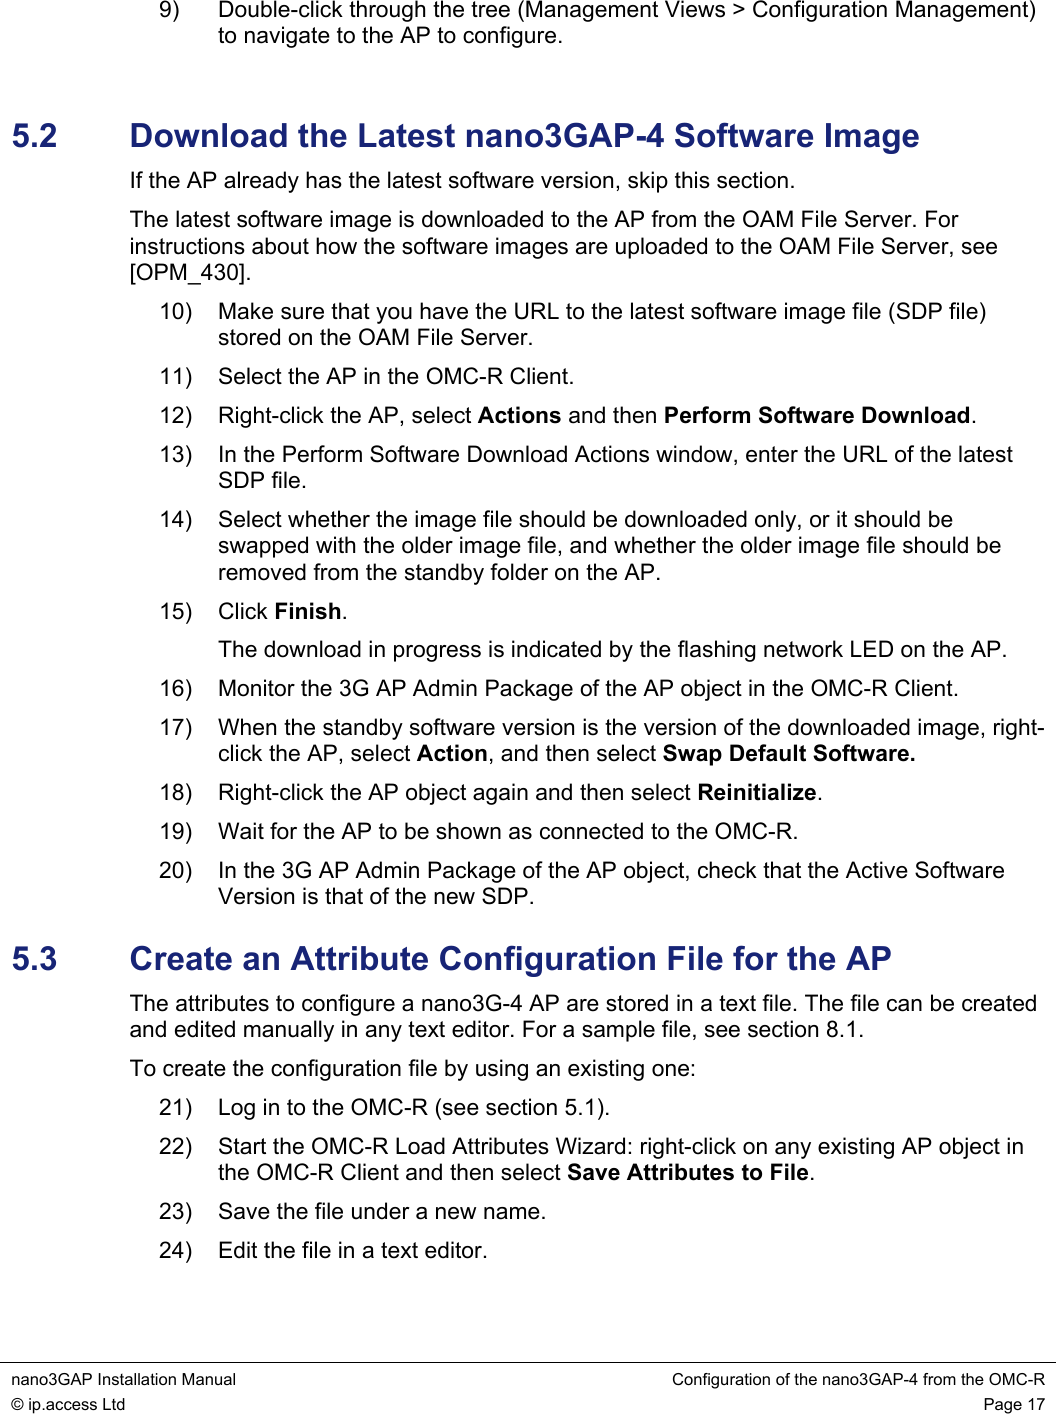  nano3GAP Installation Manual  Configuration of the nano3GAP-4 from the OMC-R © ip.access Ltd  Page 17  9)  Double-click through the tree (Management Views &gt; Configuration Management) to navigate to the AP to configure.  5.2  Download the Latest nano3GAP-4 Software Image If the AP already has the latest software version, skip this section. The latest software image is downloaded to the AP from the OAM File Server. For instructions about how the software images are uploaded to the OAM File Server, see [OPM_430]. 10)  Make sure that you have the URL to the latest software image file (SDP file) stored on the OAM File Server. 11)  Select the AP in the OMC-R Client. 12)  Right-click the AP, select Actions and then Perform Software Download. 13)  In the Perform Software Download Actions window, enter the URL of the latest SDP file. 14)  Select whether the image file should be downloaded only, or it should be swapped with the older image file, and whether the older image file should be removed from the standby folder on the AP. 15) Click Finish. The download in progress is indicated by the flashing network LED on the AP. 16)  Monitor the 3G AP Admin Package of the AP object in the OMC-R Client. 17)  When the standby software version is the version of the downloaded image, right-click the AP, select Action, and then select Swap Default Software. 18)  Right-click the AP object again and then select Reinitialize. 19)  Wait for the AP to be shown as connected to the OMC-R. 20)  In the 3G AP Admin Package of the AP object, check that the Active Software Version is that of the new SDP. 5.3  Create an Attribute Configuration File for the AP The attributes to configure a nano3G-4 AP are stored in a text file. The file can be created and edited manually in any text editor. For a sample file, see section 8.1. To create the configuration file by using an existing one: 21)  Log in to the OMC-R (see section 5.1). 22)  Start the OMC-R Load Attributes Wizard: right-click on any existing AP object in the OMC-R Client and then select Save Attributes to File. 23)  Save the file under a new name. 24)  Edit the file in a text editor.  